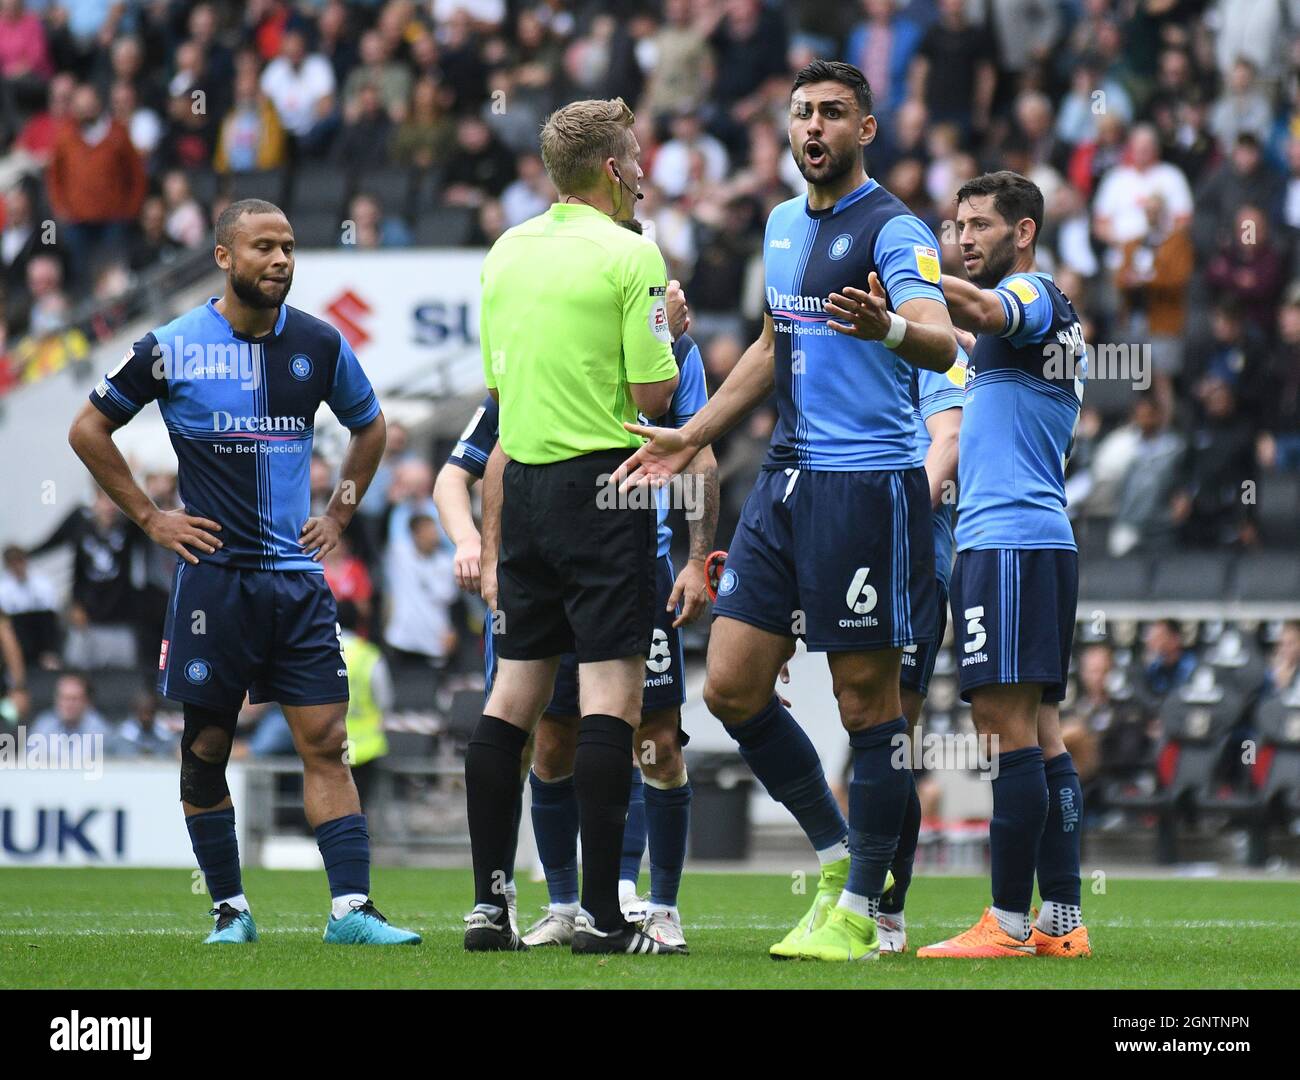 MILTON KEYNES, ENGLAND - SEPTEMBER 25, 2021: Ryan Sirous Tafazolli of Wycombe protests after English referee Scott Oldham awarded MK Dons a penalty during the 2021/22 SkyBet EFL League One matchweek 9 game between MK Dons FC and Wycombe Wanderers FC at Stadium MK. Copyright: Cosmin Iftode/Picstaff Stock Photo